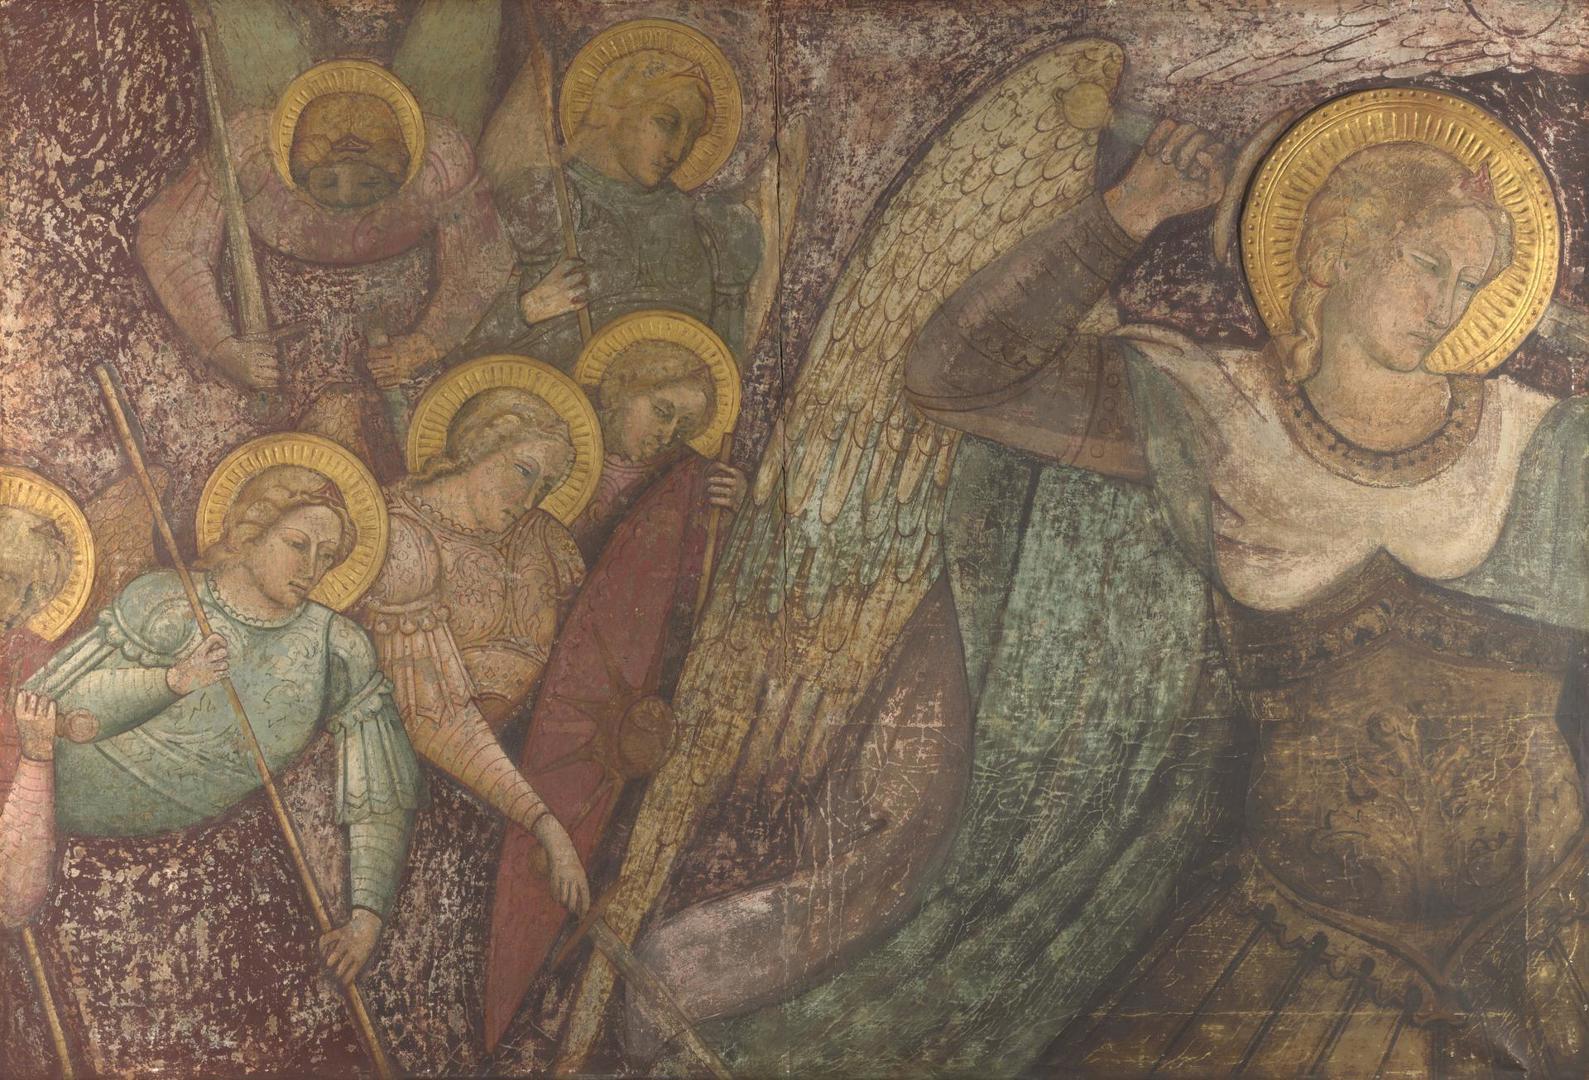 Saint Michael and Other Angels by Spinello Aretino